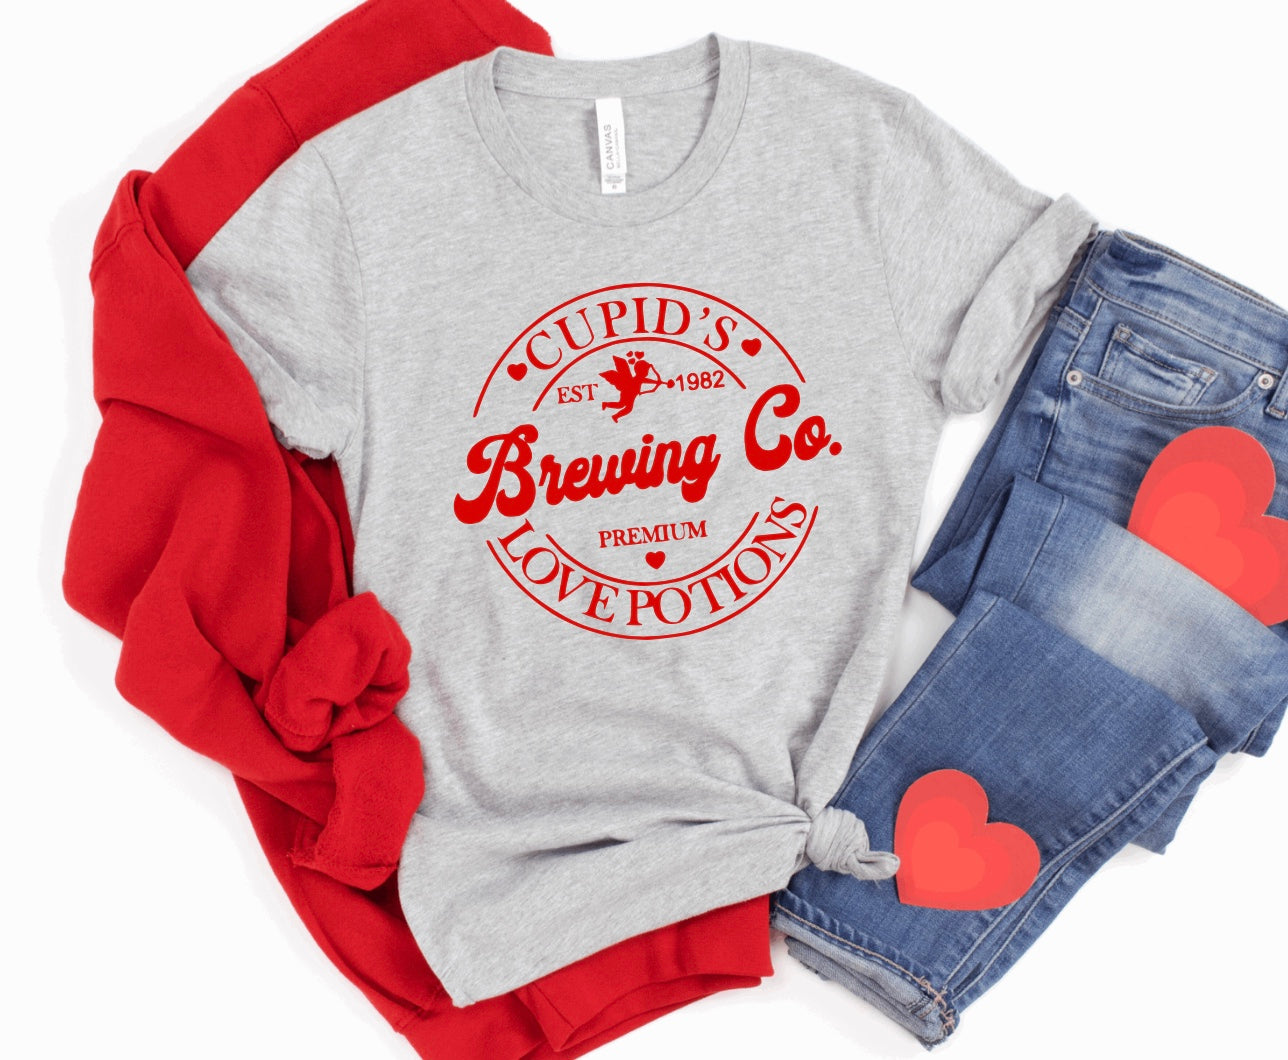 Cupids brewing co Valentine’s Day unisex t-shirt for women in light grey